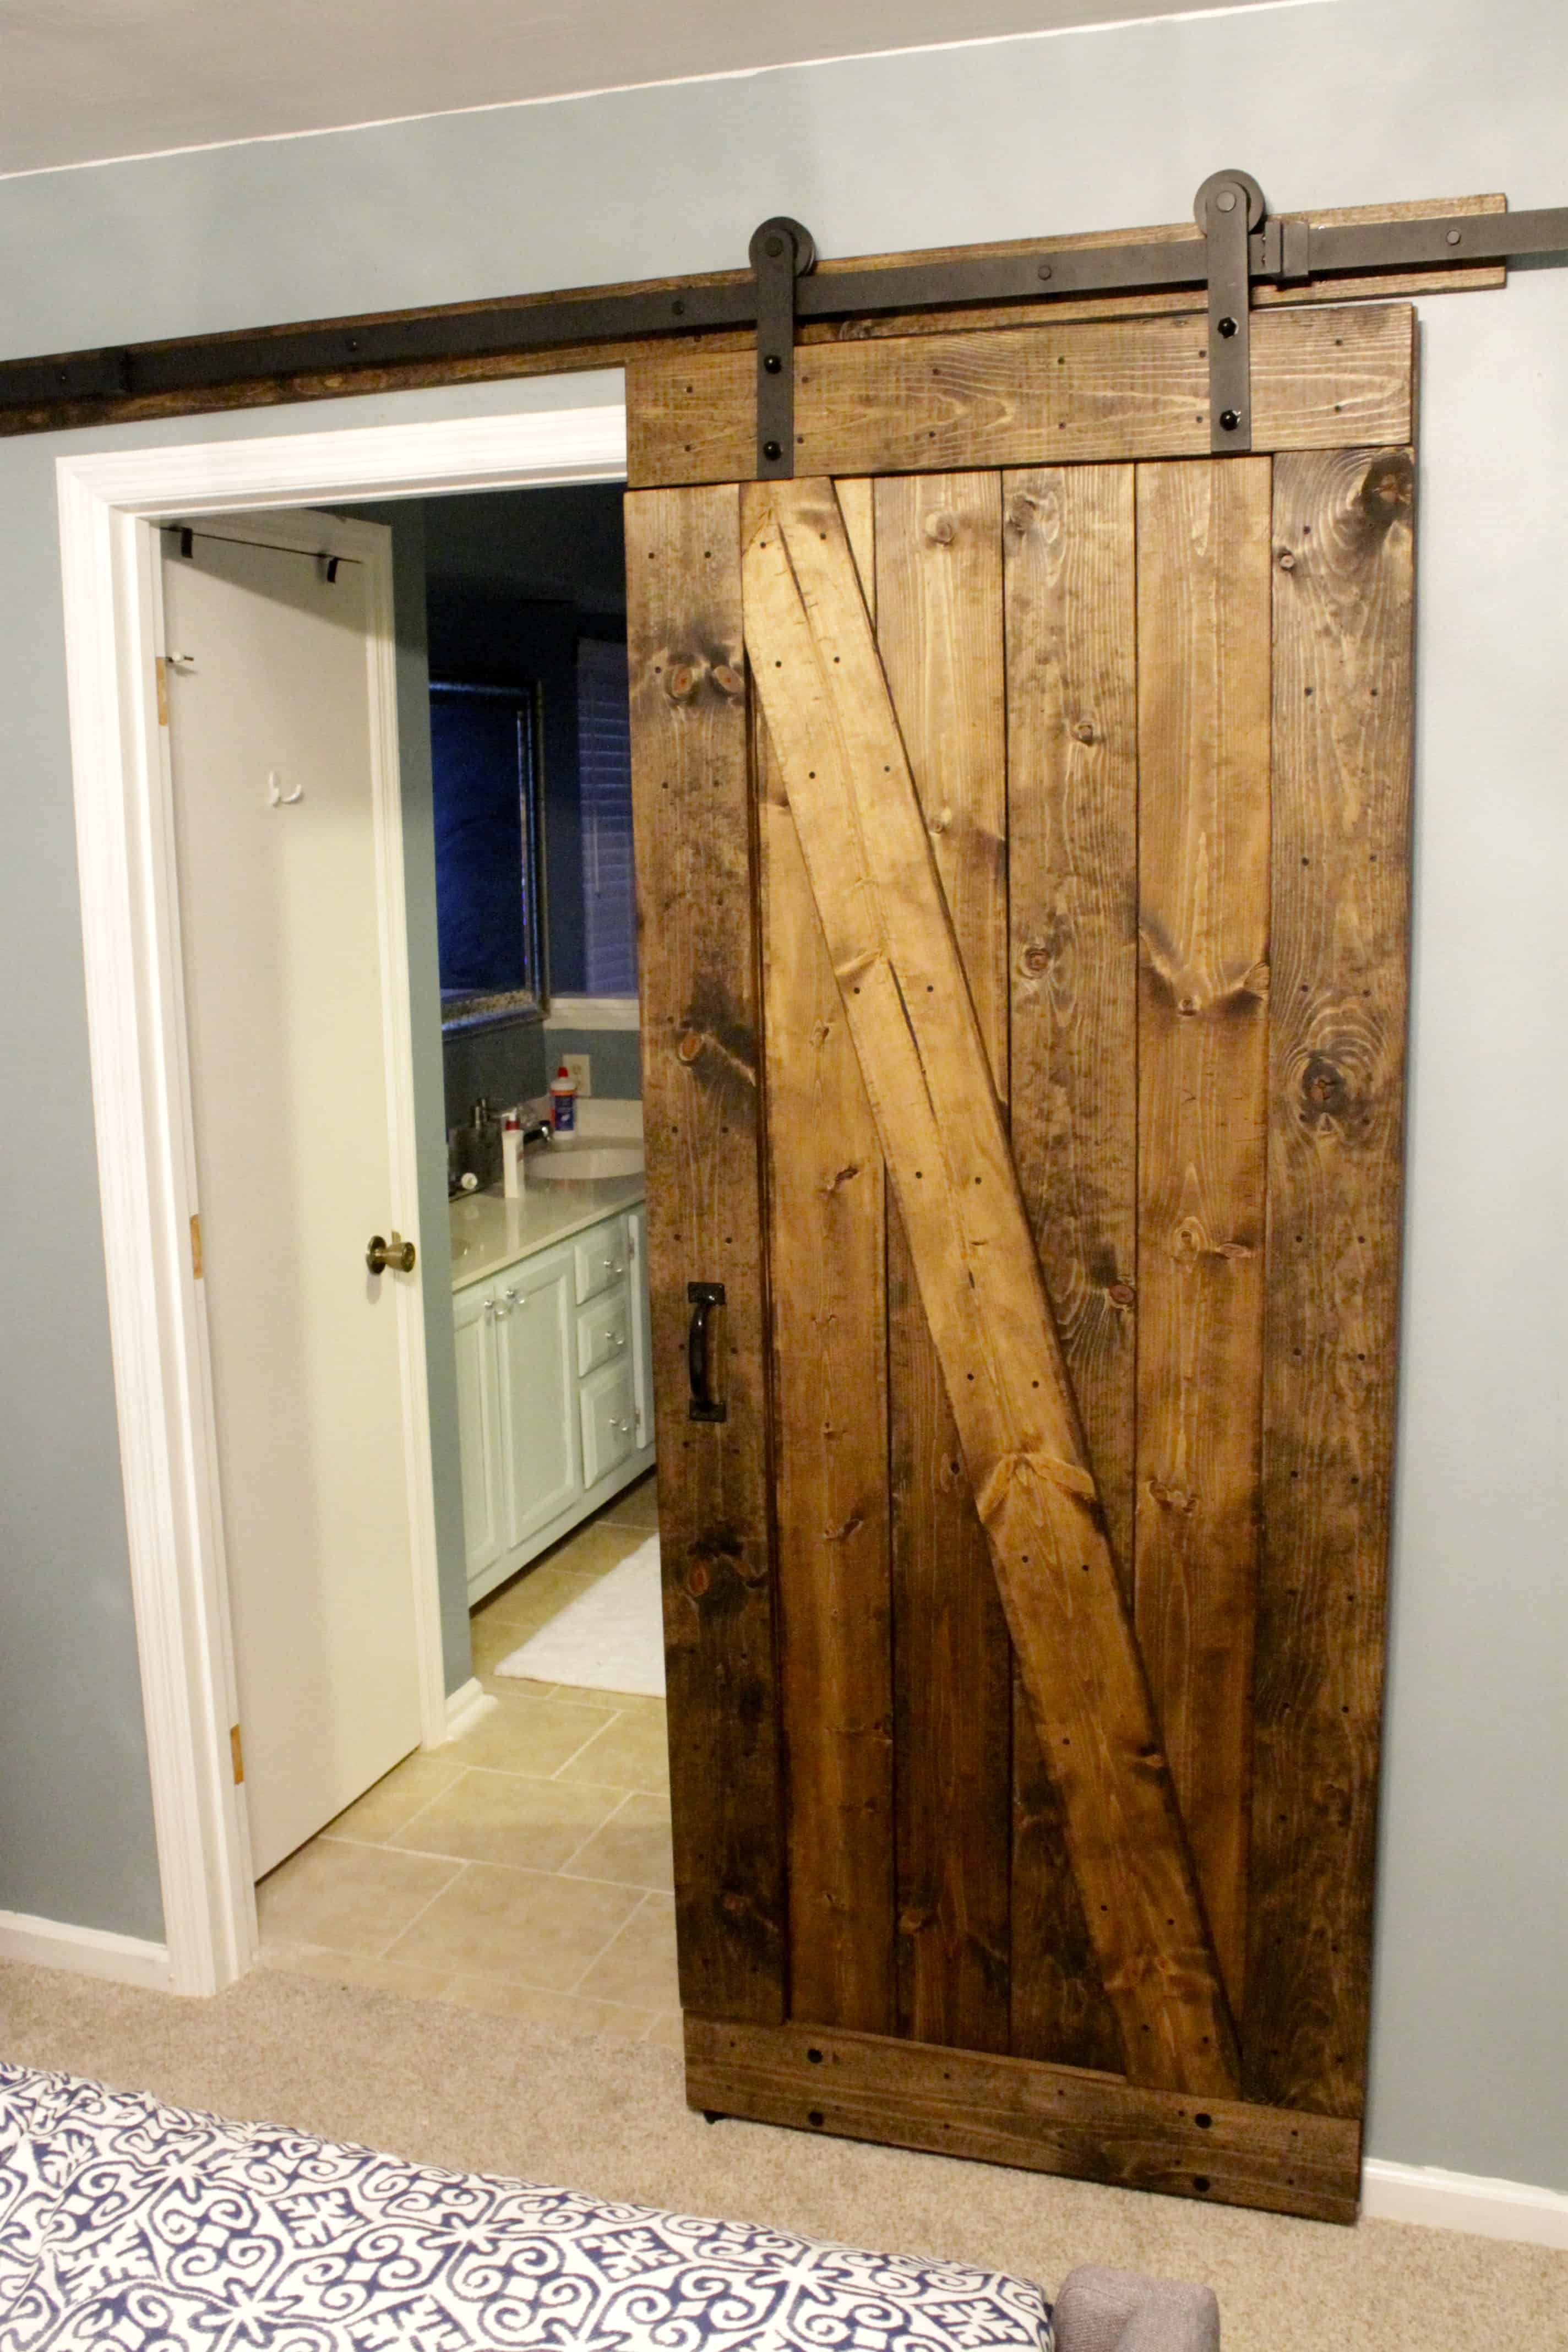 How to build a sliding barn door for a bathroom Free Pdf Plans Build A Rustic Barn Door The Easiest Cheapest Way